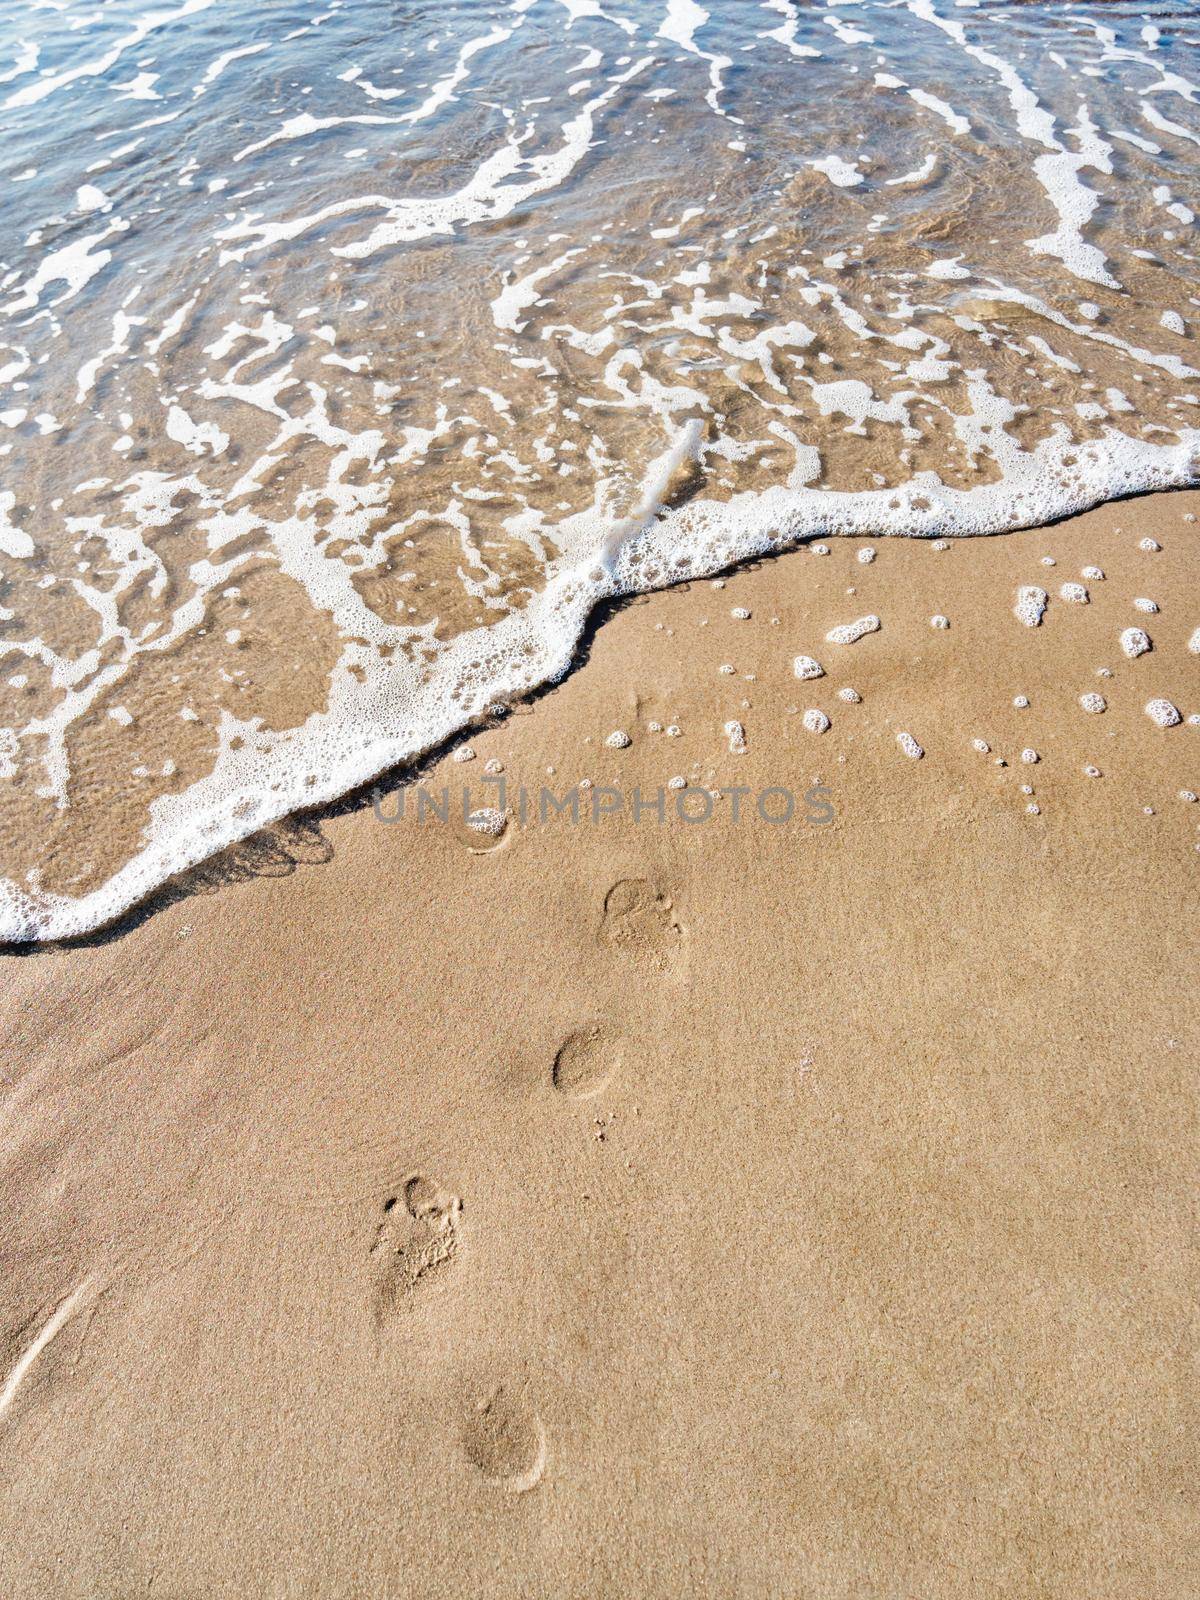 Footprints on wet sand. Sea surf and marks of bare feet. Walking on beach. Leisure activity. Vacation in country with warm climate. Travel. by aksenovko